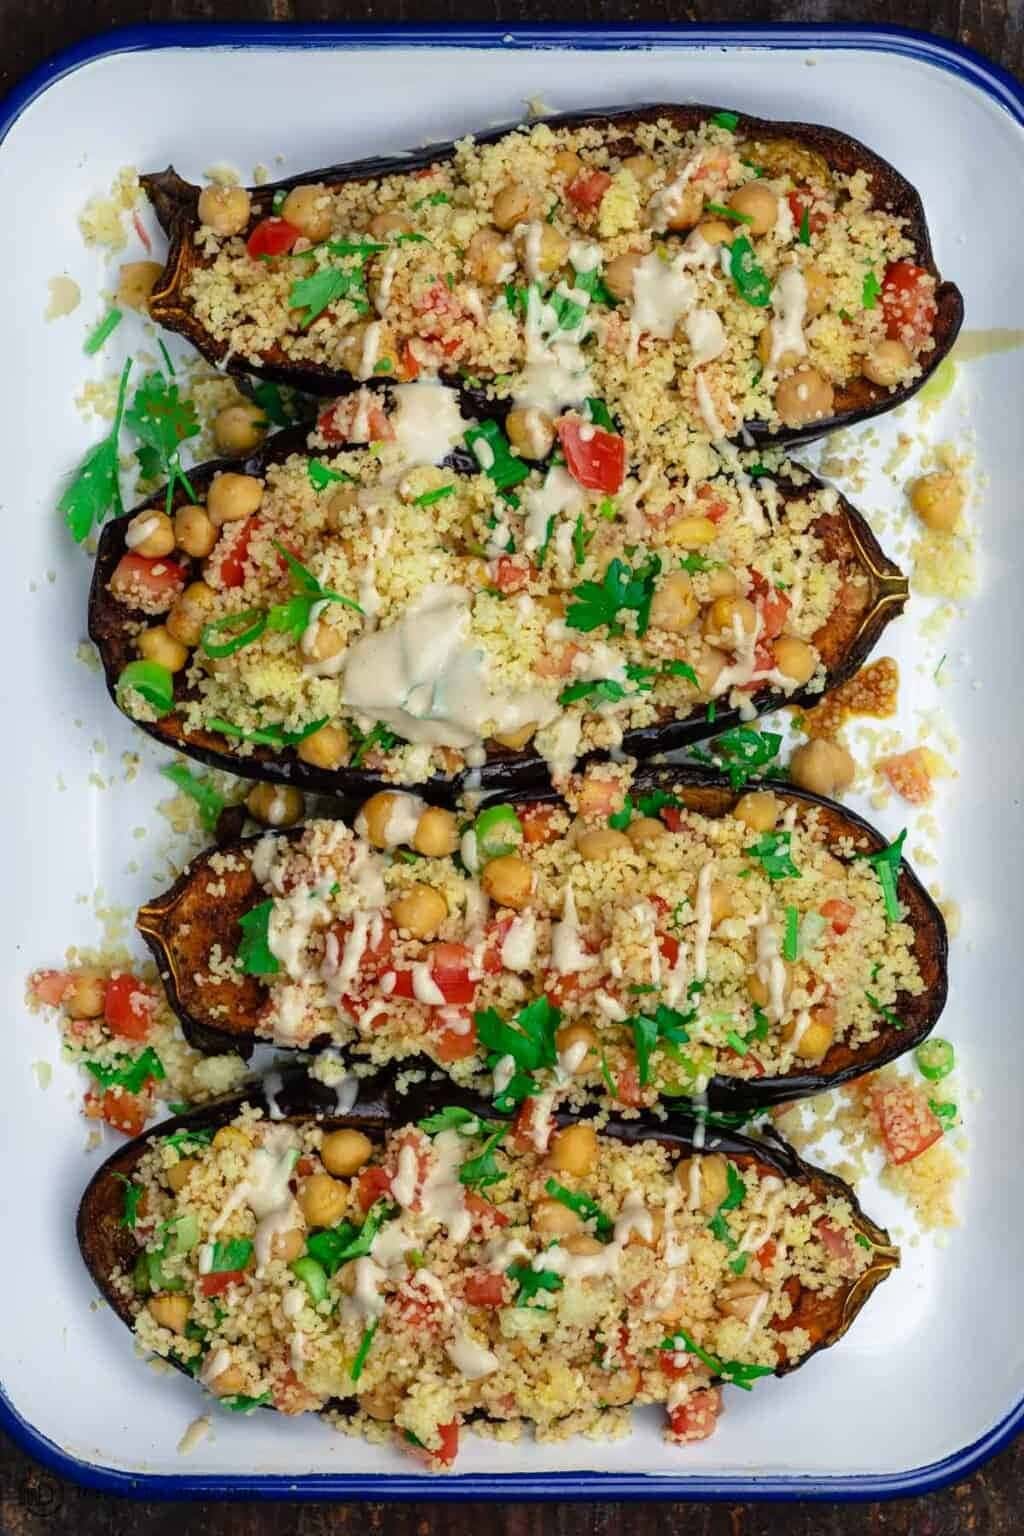 Eggplant stuffed with mixture of chickpeas, couscous, tomatoes, and fresh herbs.